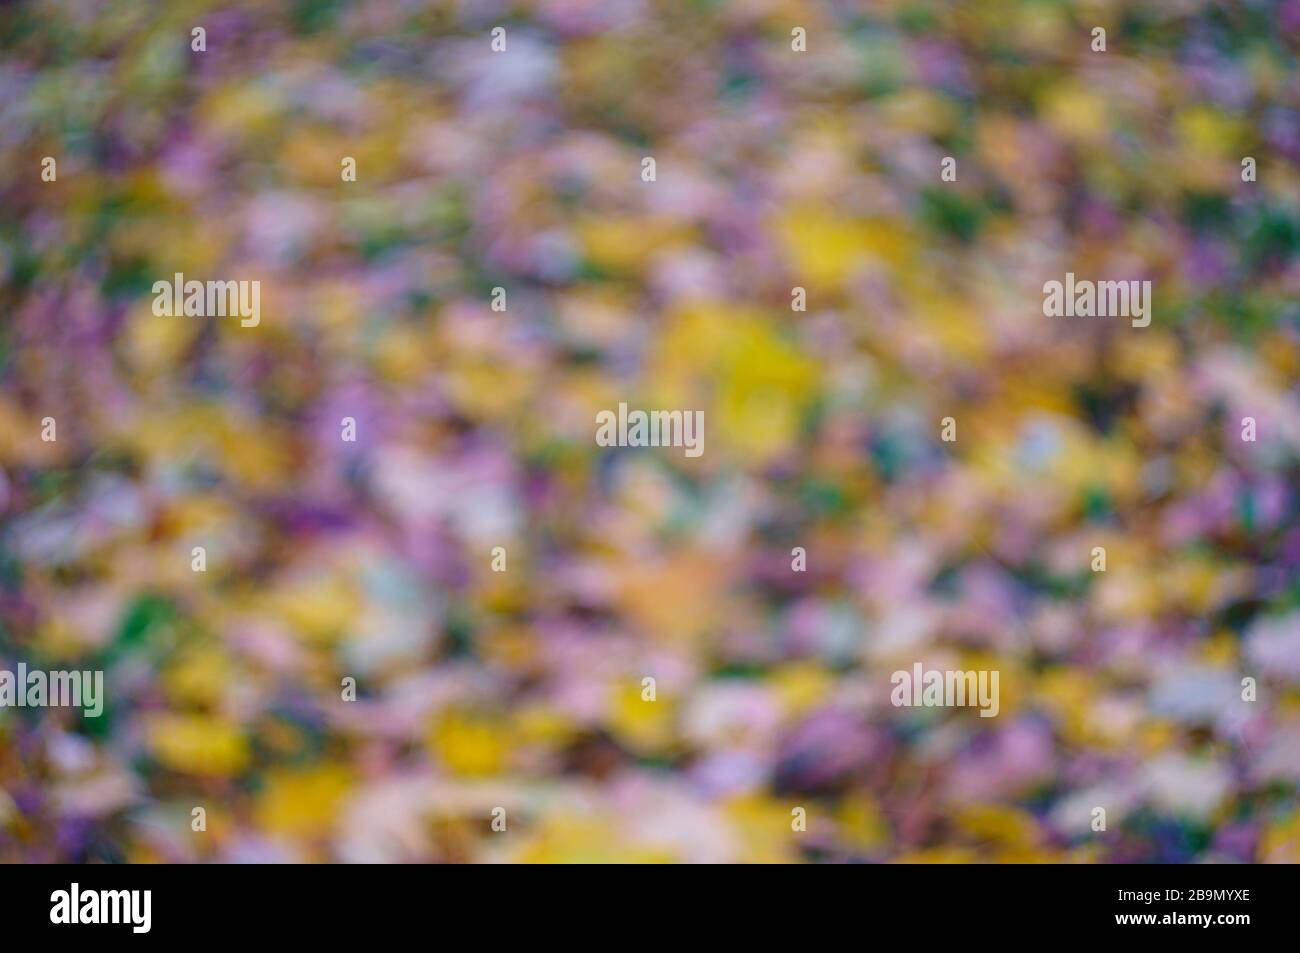 Motley background from the varicolored fallen foliage. Autumn background. The image is out of focus, blurry. Stock Photo